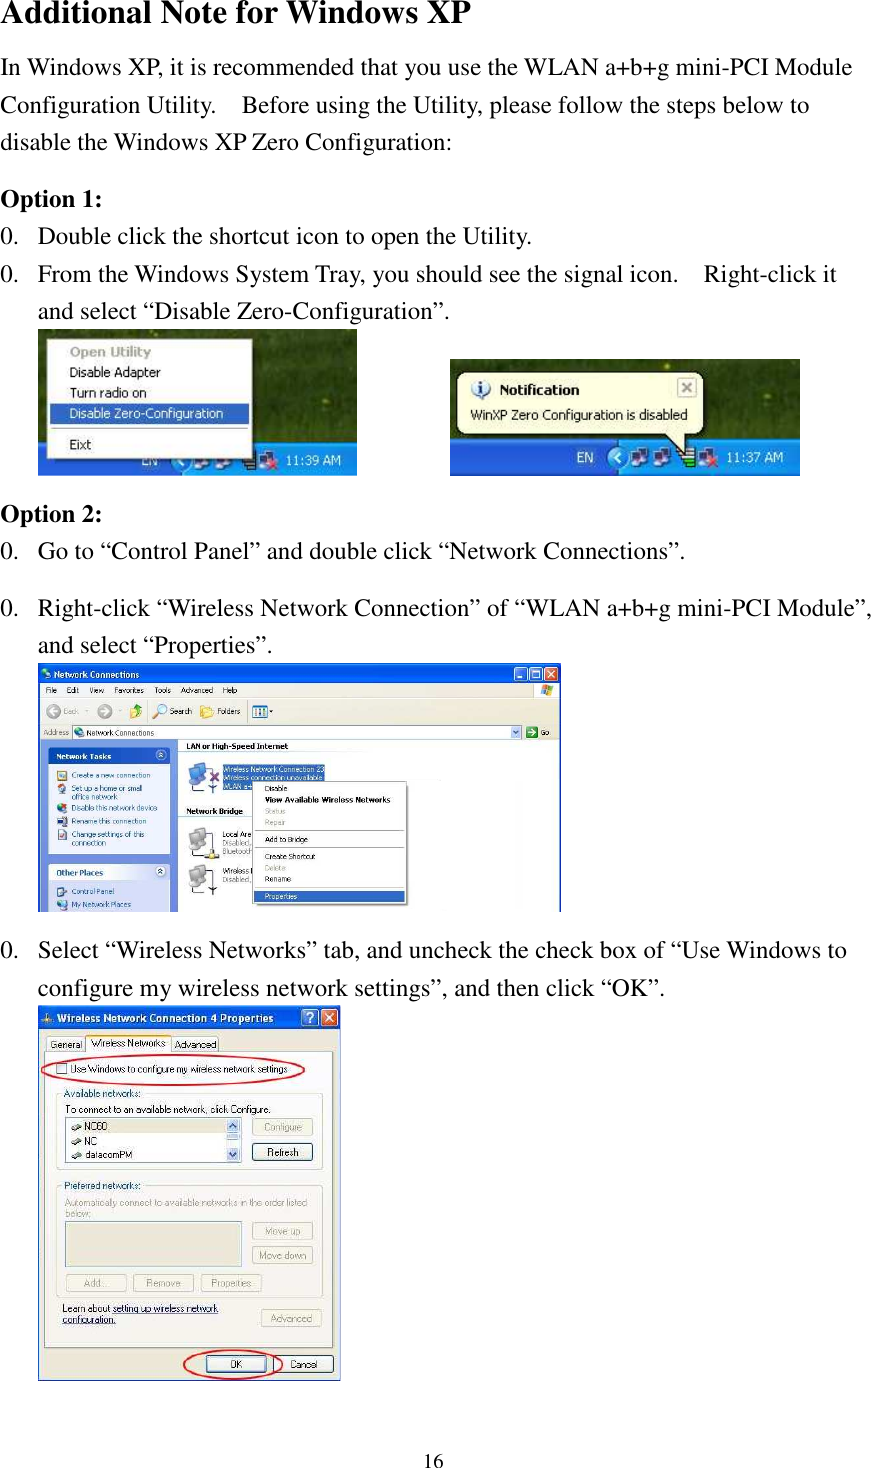   16Additional Note for Windows XP   In Windows XP, it is recommended that you use the WLAN a+b+g mini-PCI Module Configuration Utility.    Before using the Utility, please follow the steps below to disable the Windows XP Zero Configuration:  Option 1: 0. Double click the shortcut icon to open the Utility. 0. From the Windows System Tray, you should see the signal icon.    Right-click it and select “Disable Zero-Configuration”.      Option 2: 0. Go to “Control Panel” and double click “Network Connections”.  0. Right-click “Wireless Network Connection” of “WLAN a+b+g mini-PCI Module”, and select “Properties”.   0. Select “Wireless Networks” tab, and uncheck the check box of “Use Windows to configure my wireless network settings”, and then click “OK”.  